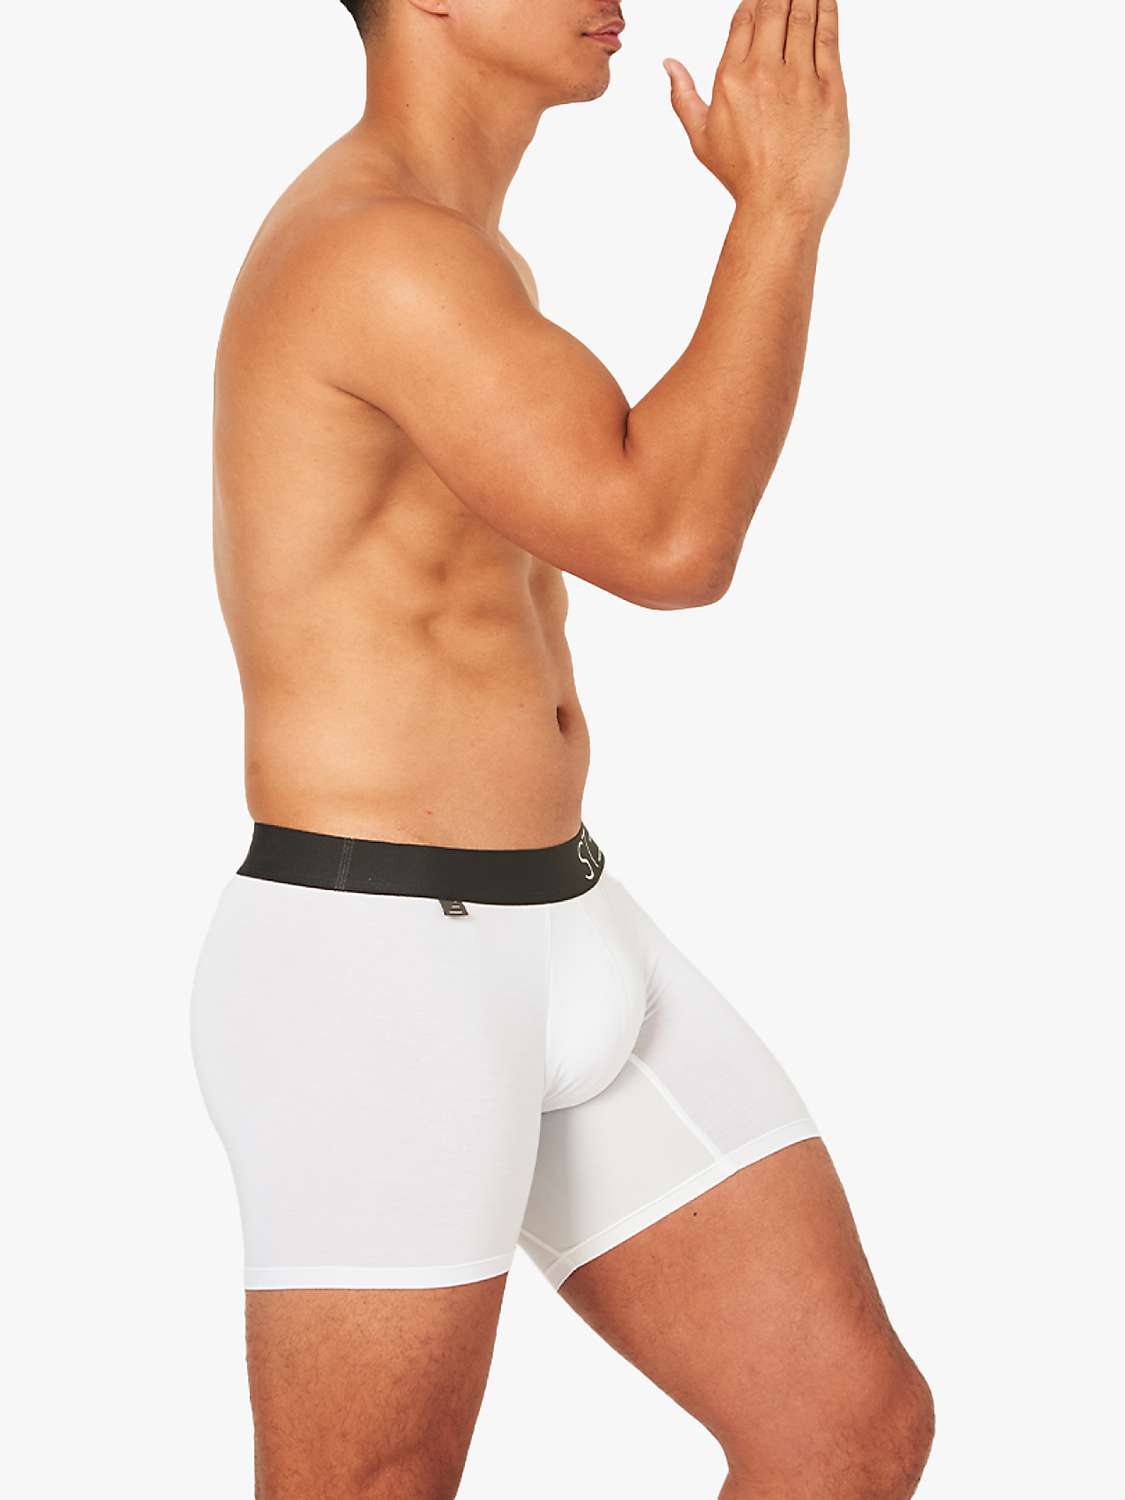 Buy Step One Bamboo Trunks Online at johnlewis.com